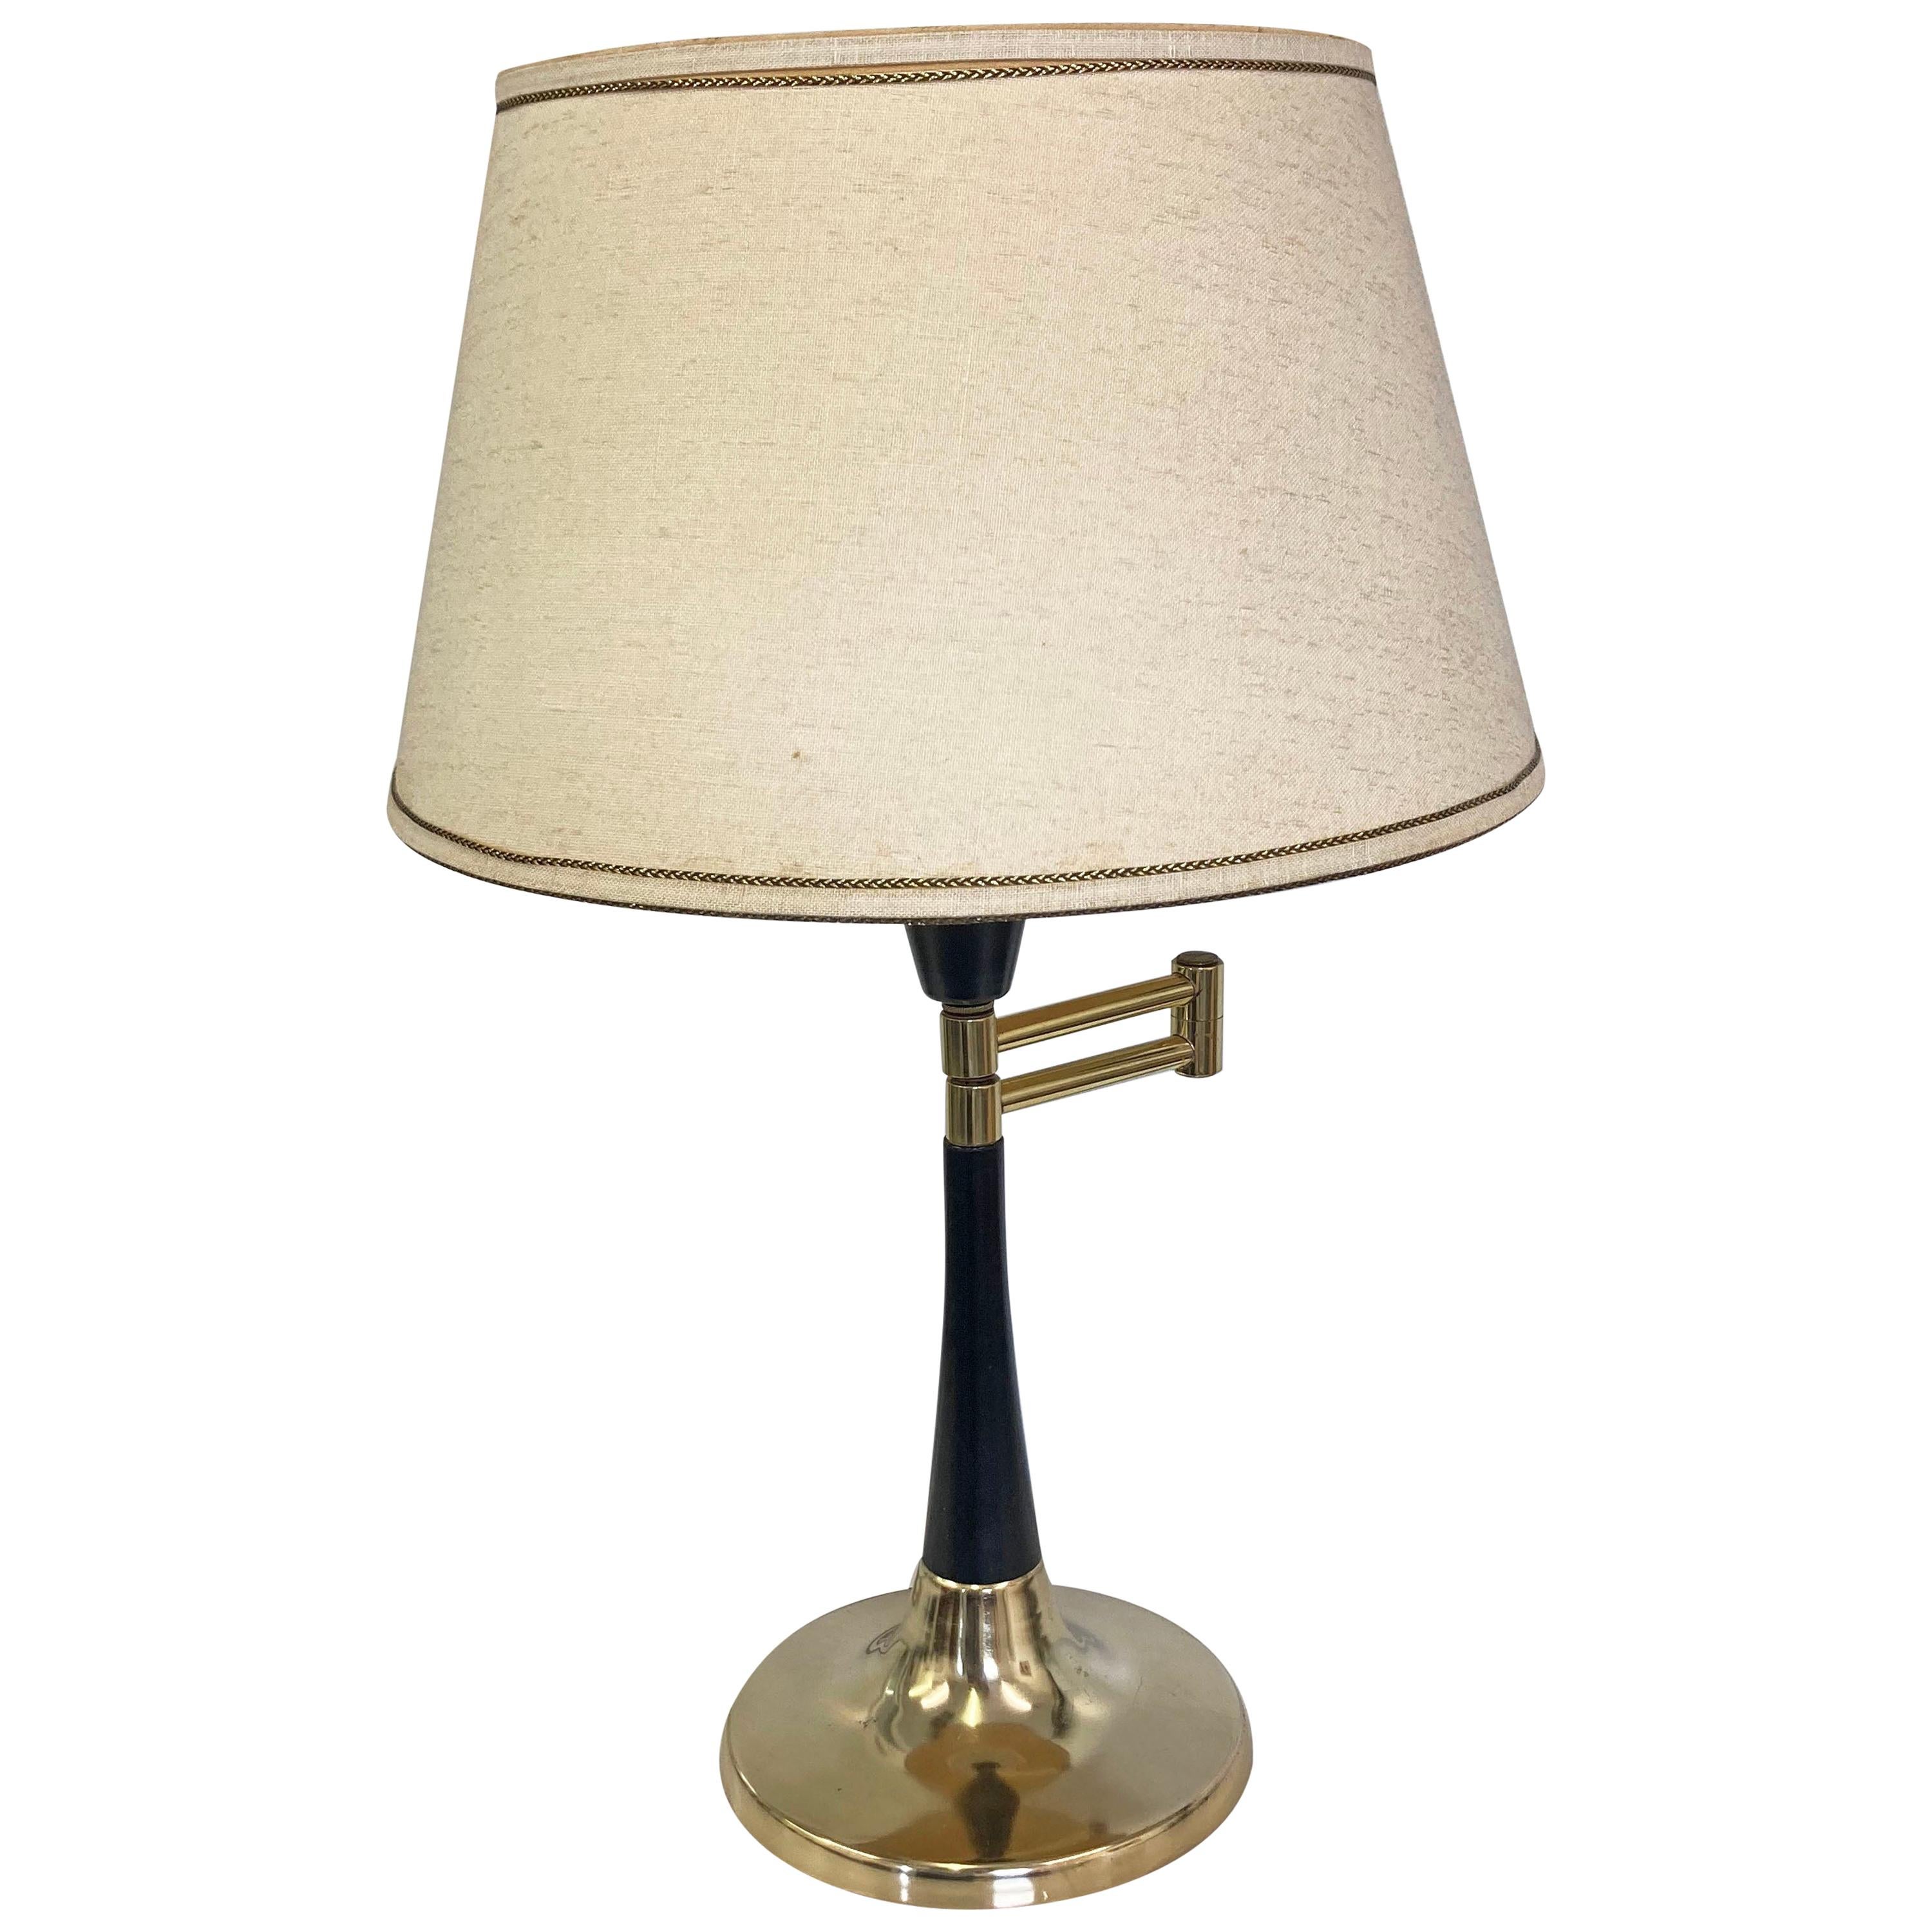 Mid-Century Modern Swing Arm Diffuser Table Lamp by Underwriters Laboratories For Sale